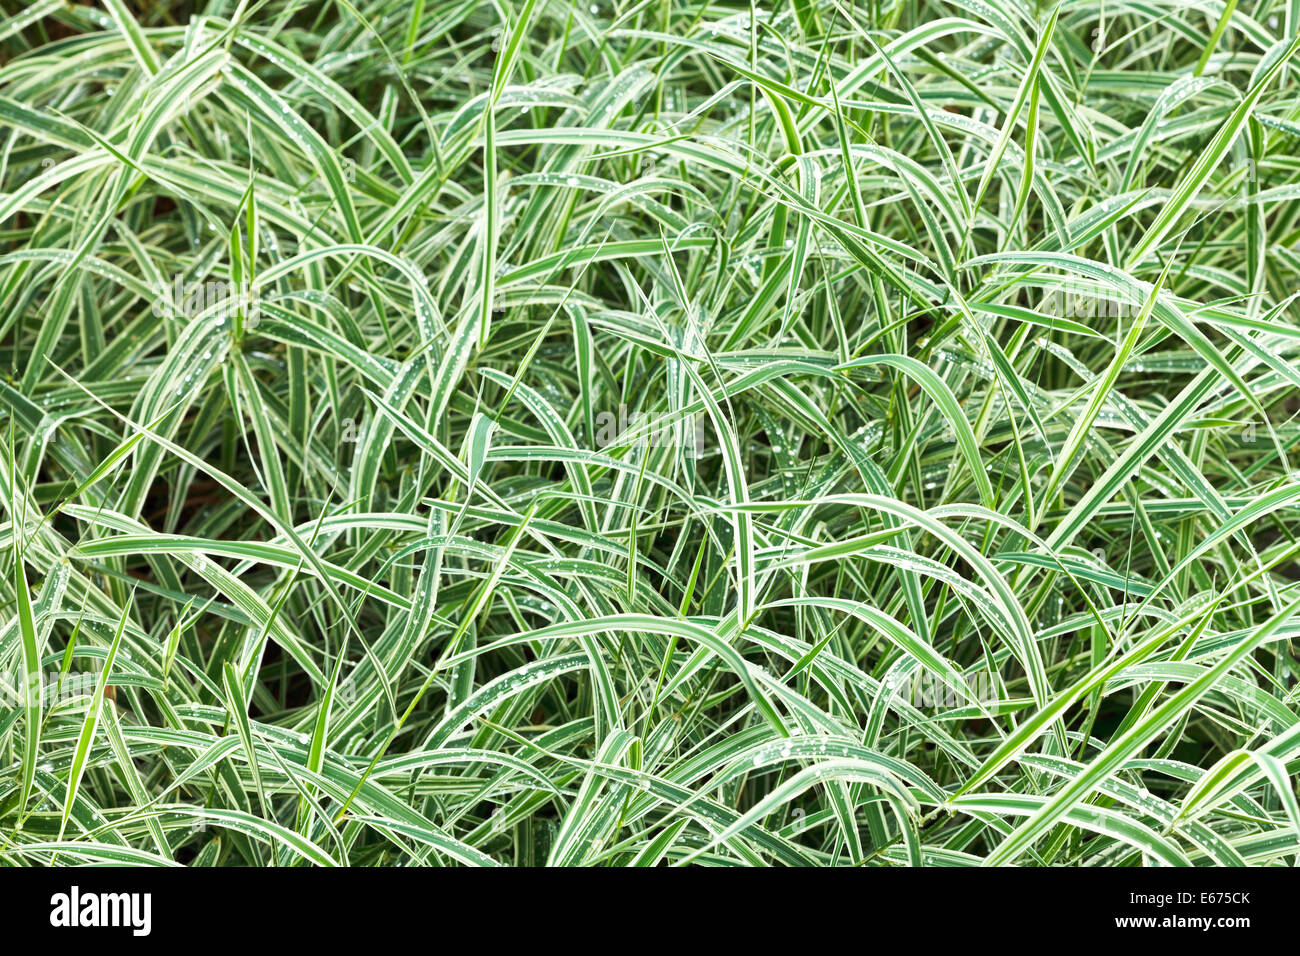 natural background from wet green blades of Carex morrowii japonica decorative grass after rain Stock Photo